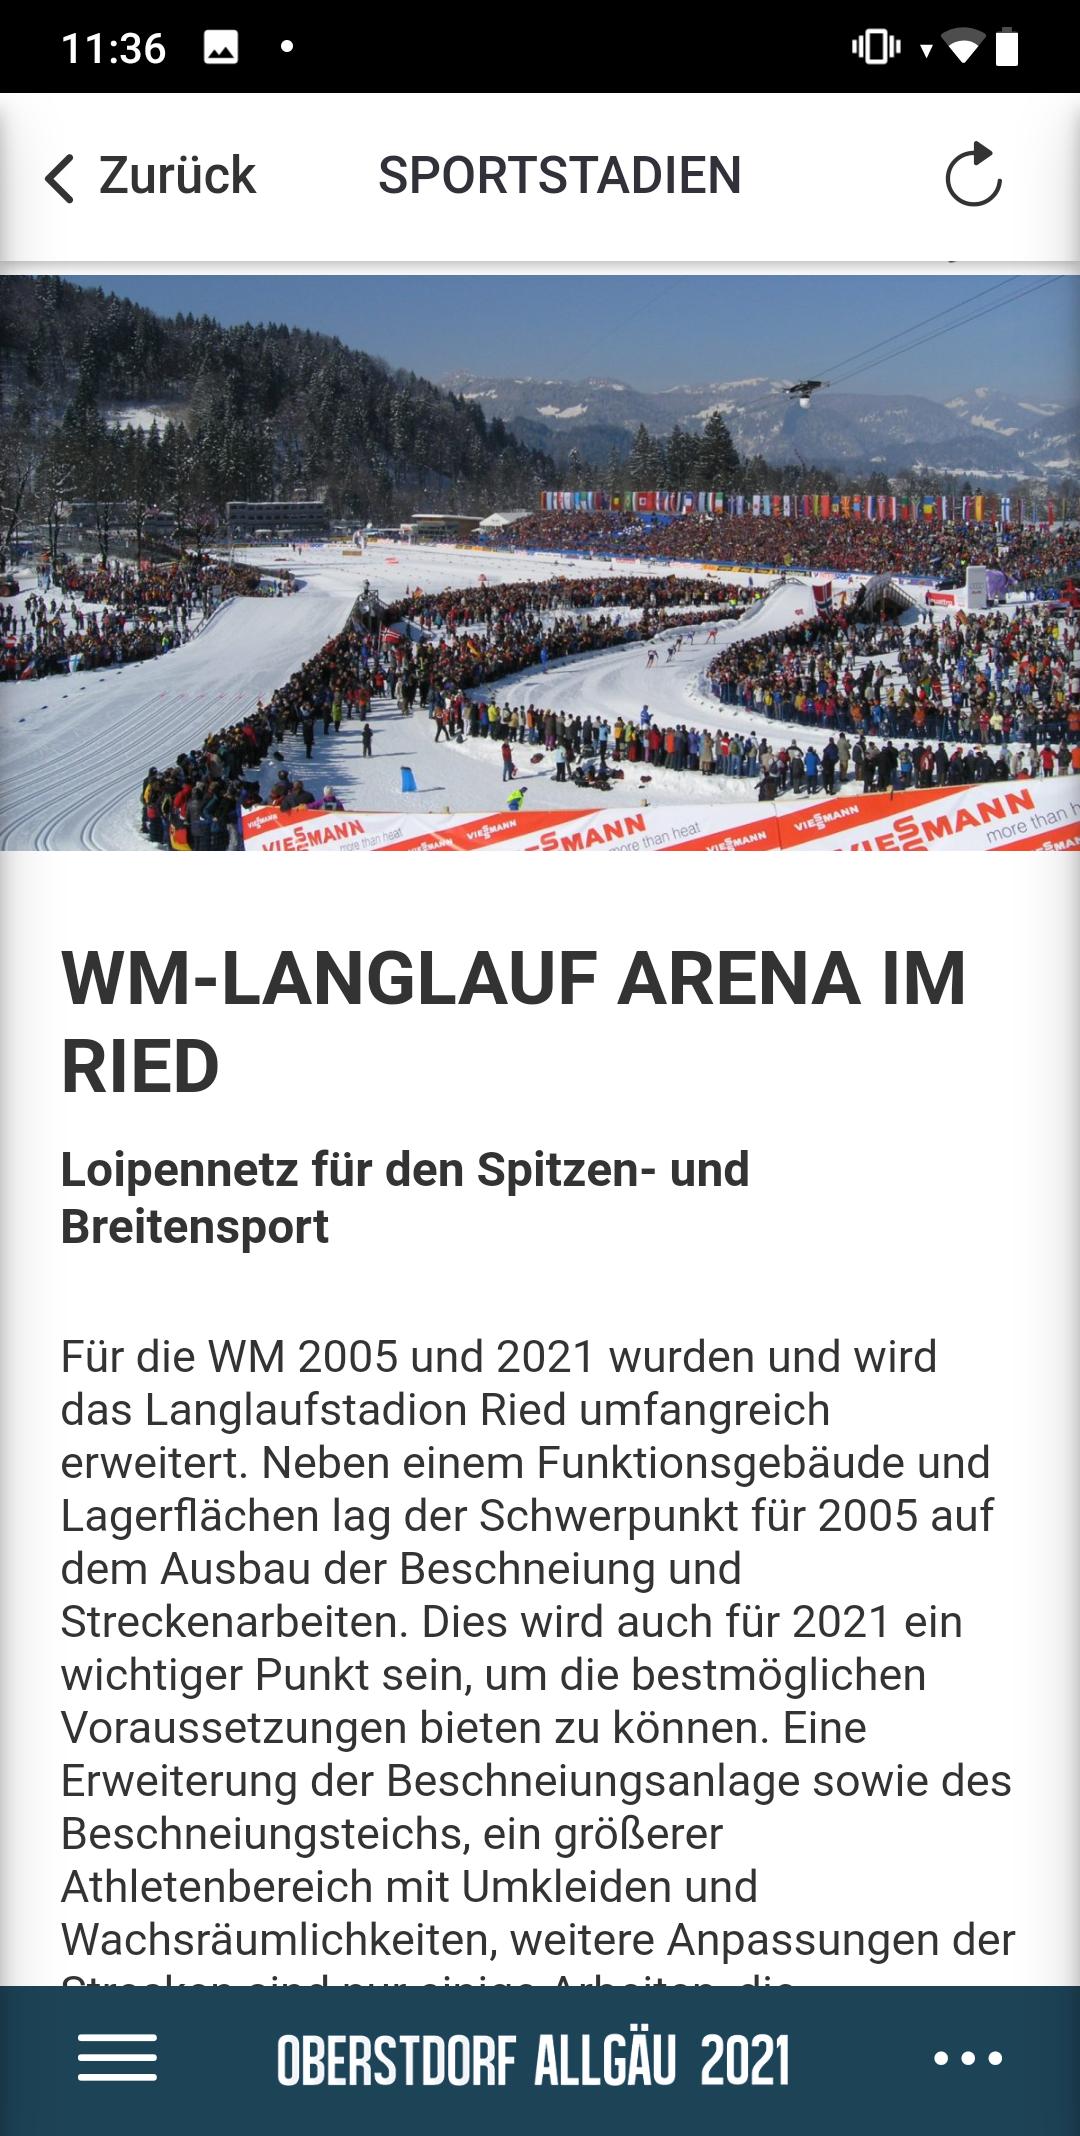 Oberstdorf 2021 for Android - APK Download